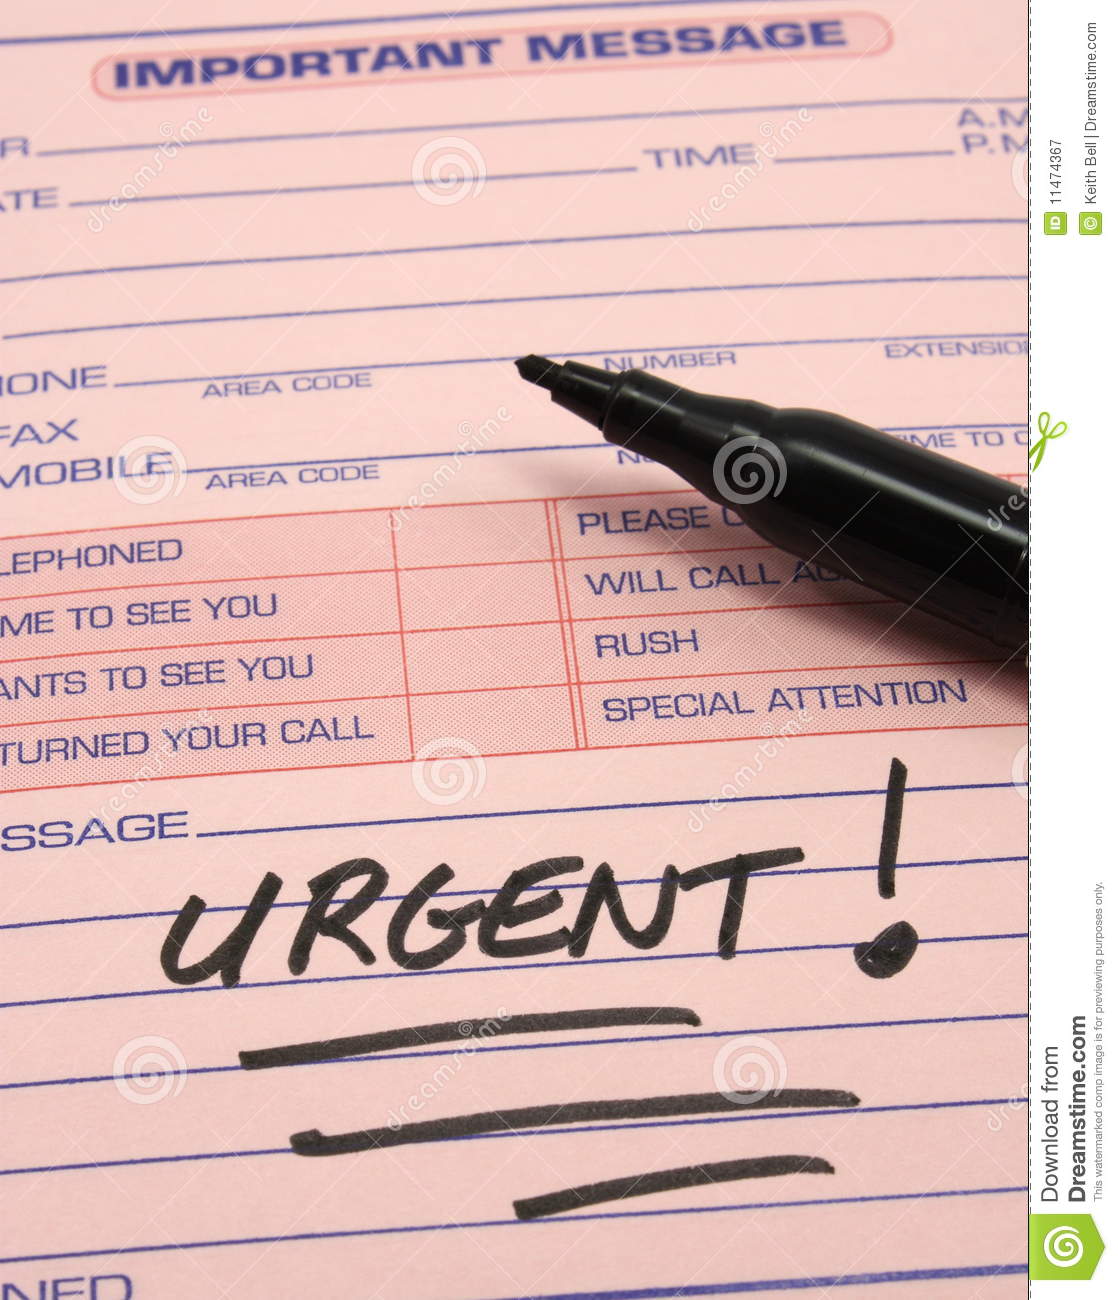 Urgent Message Royalty Free Stock Photography   Image  11474367